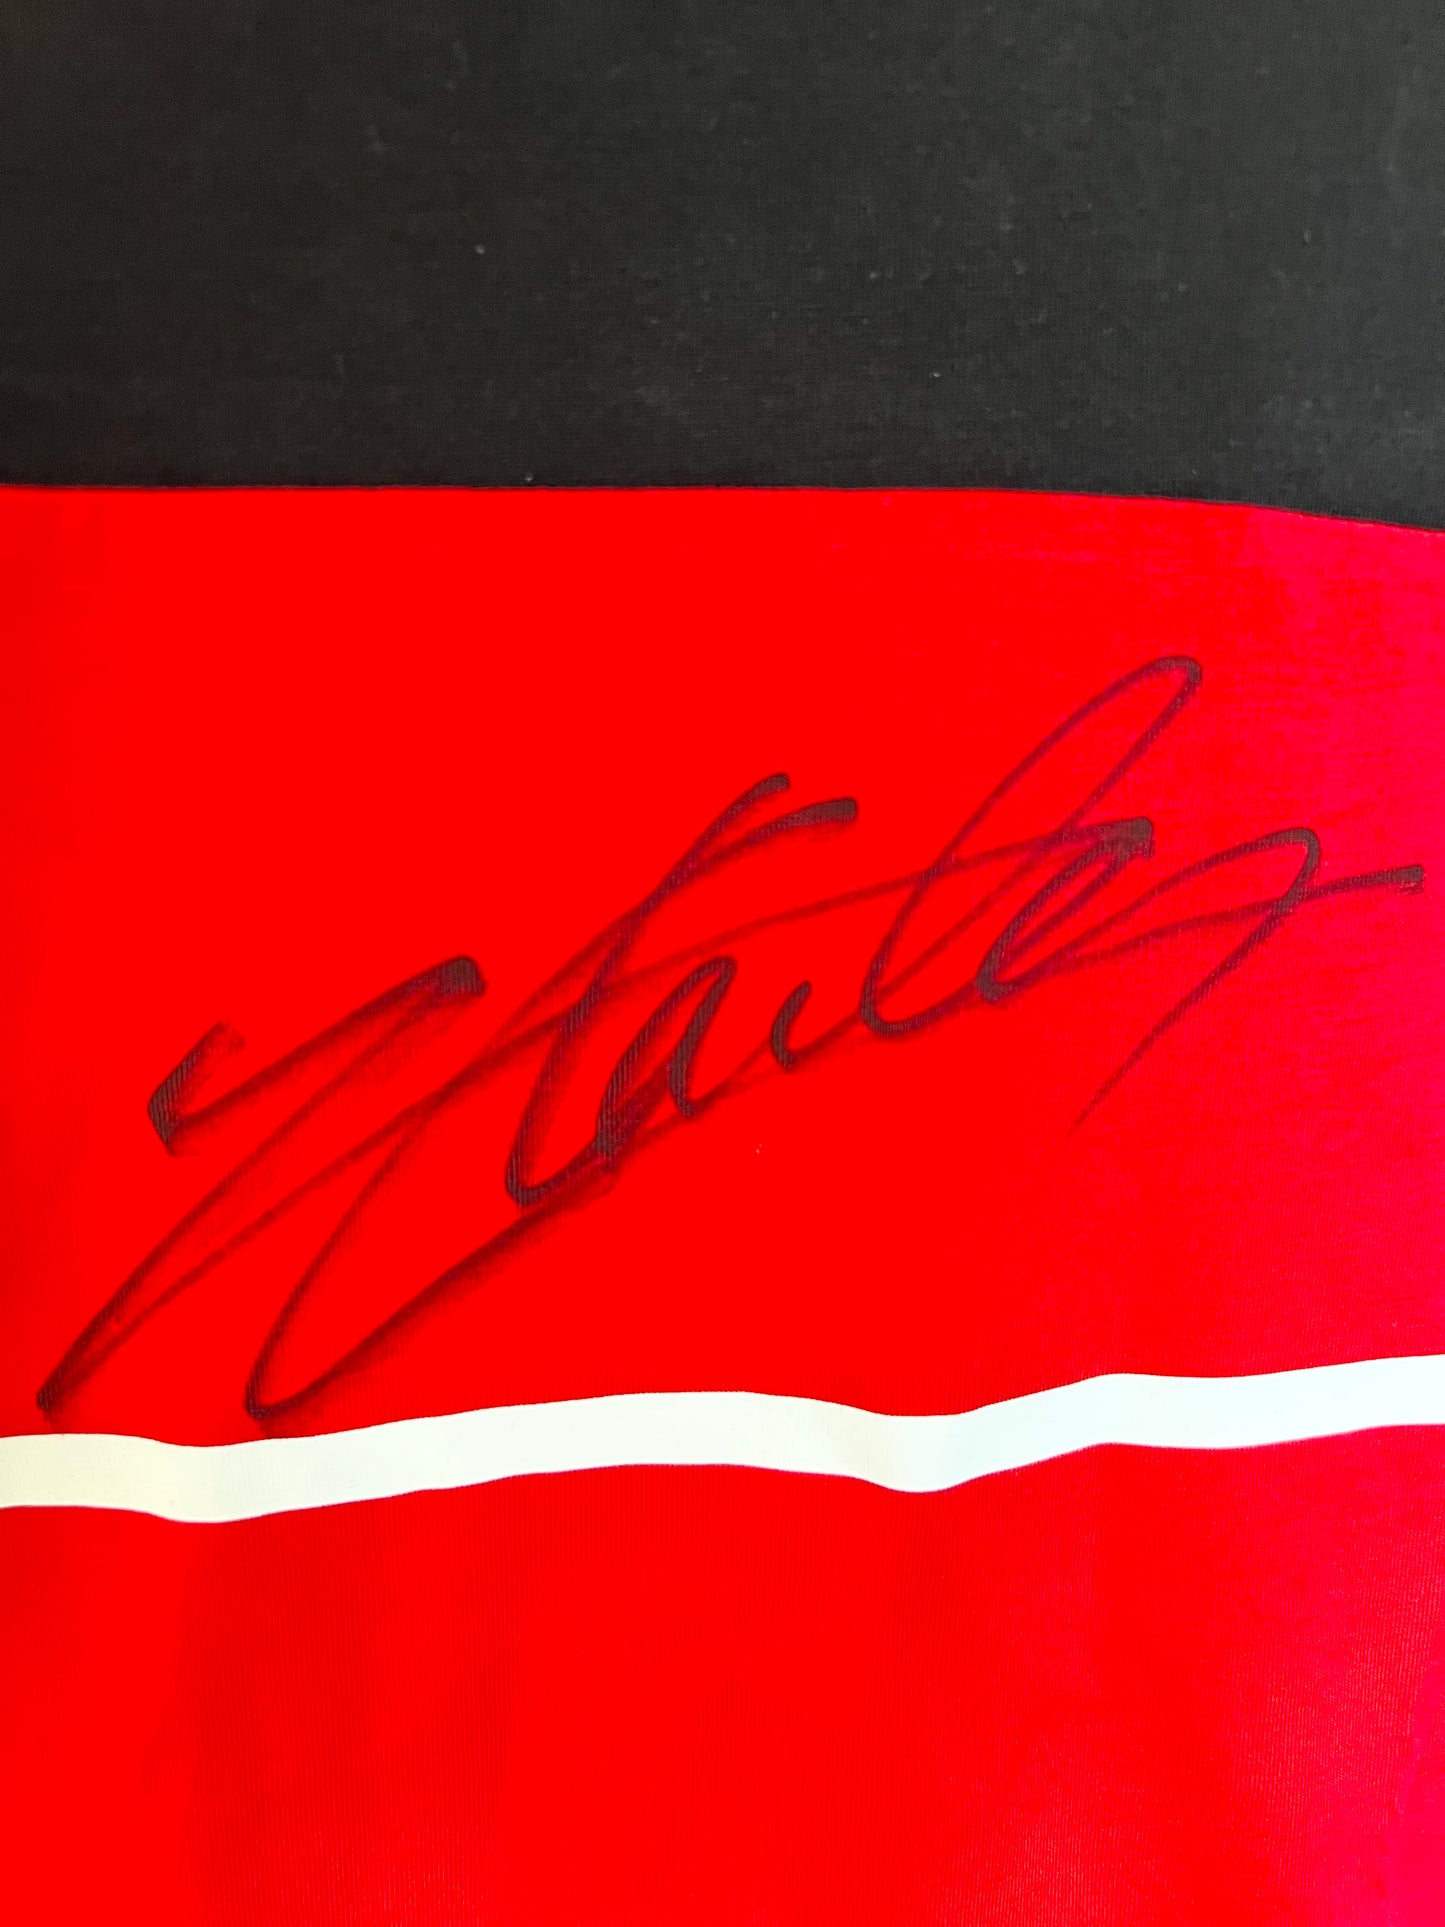 Charles Leclerc Signed Autographed Ferrari Racing Jersey Beckett Authentication